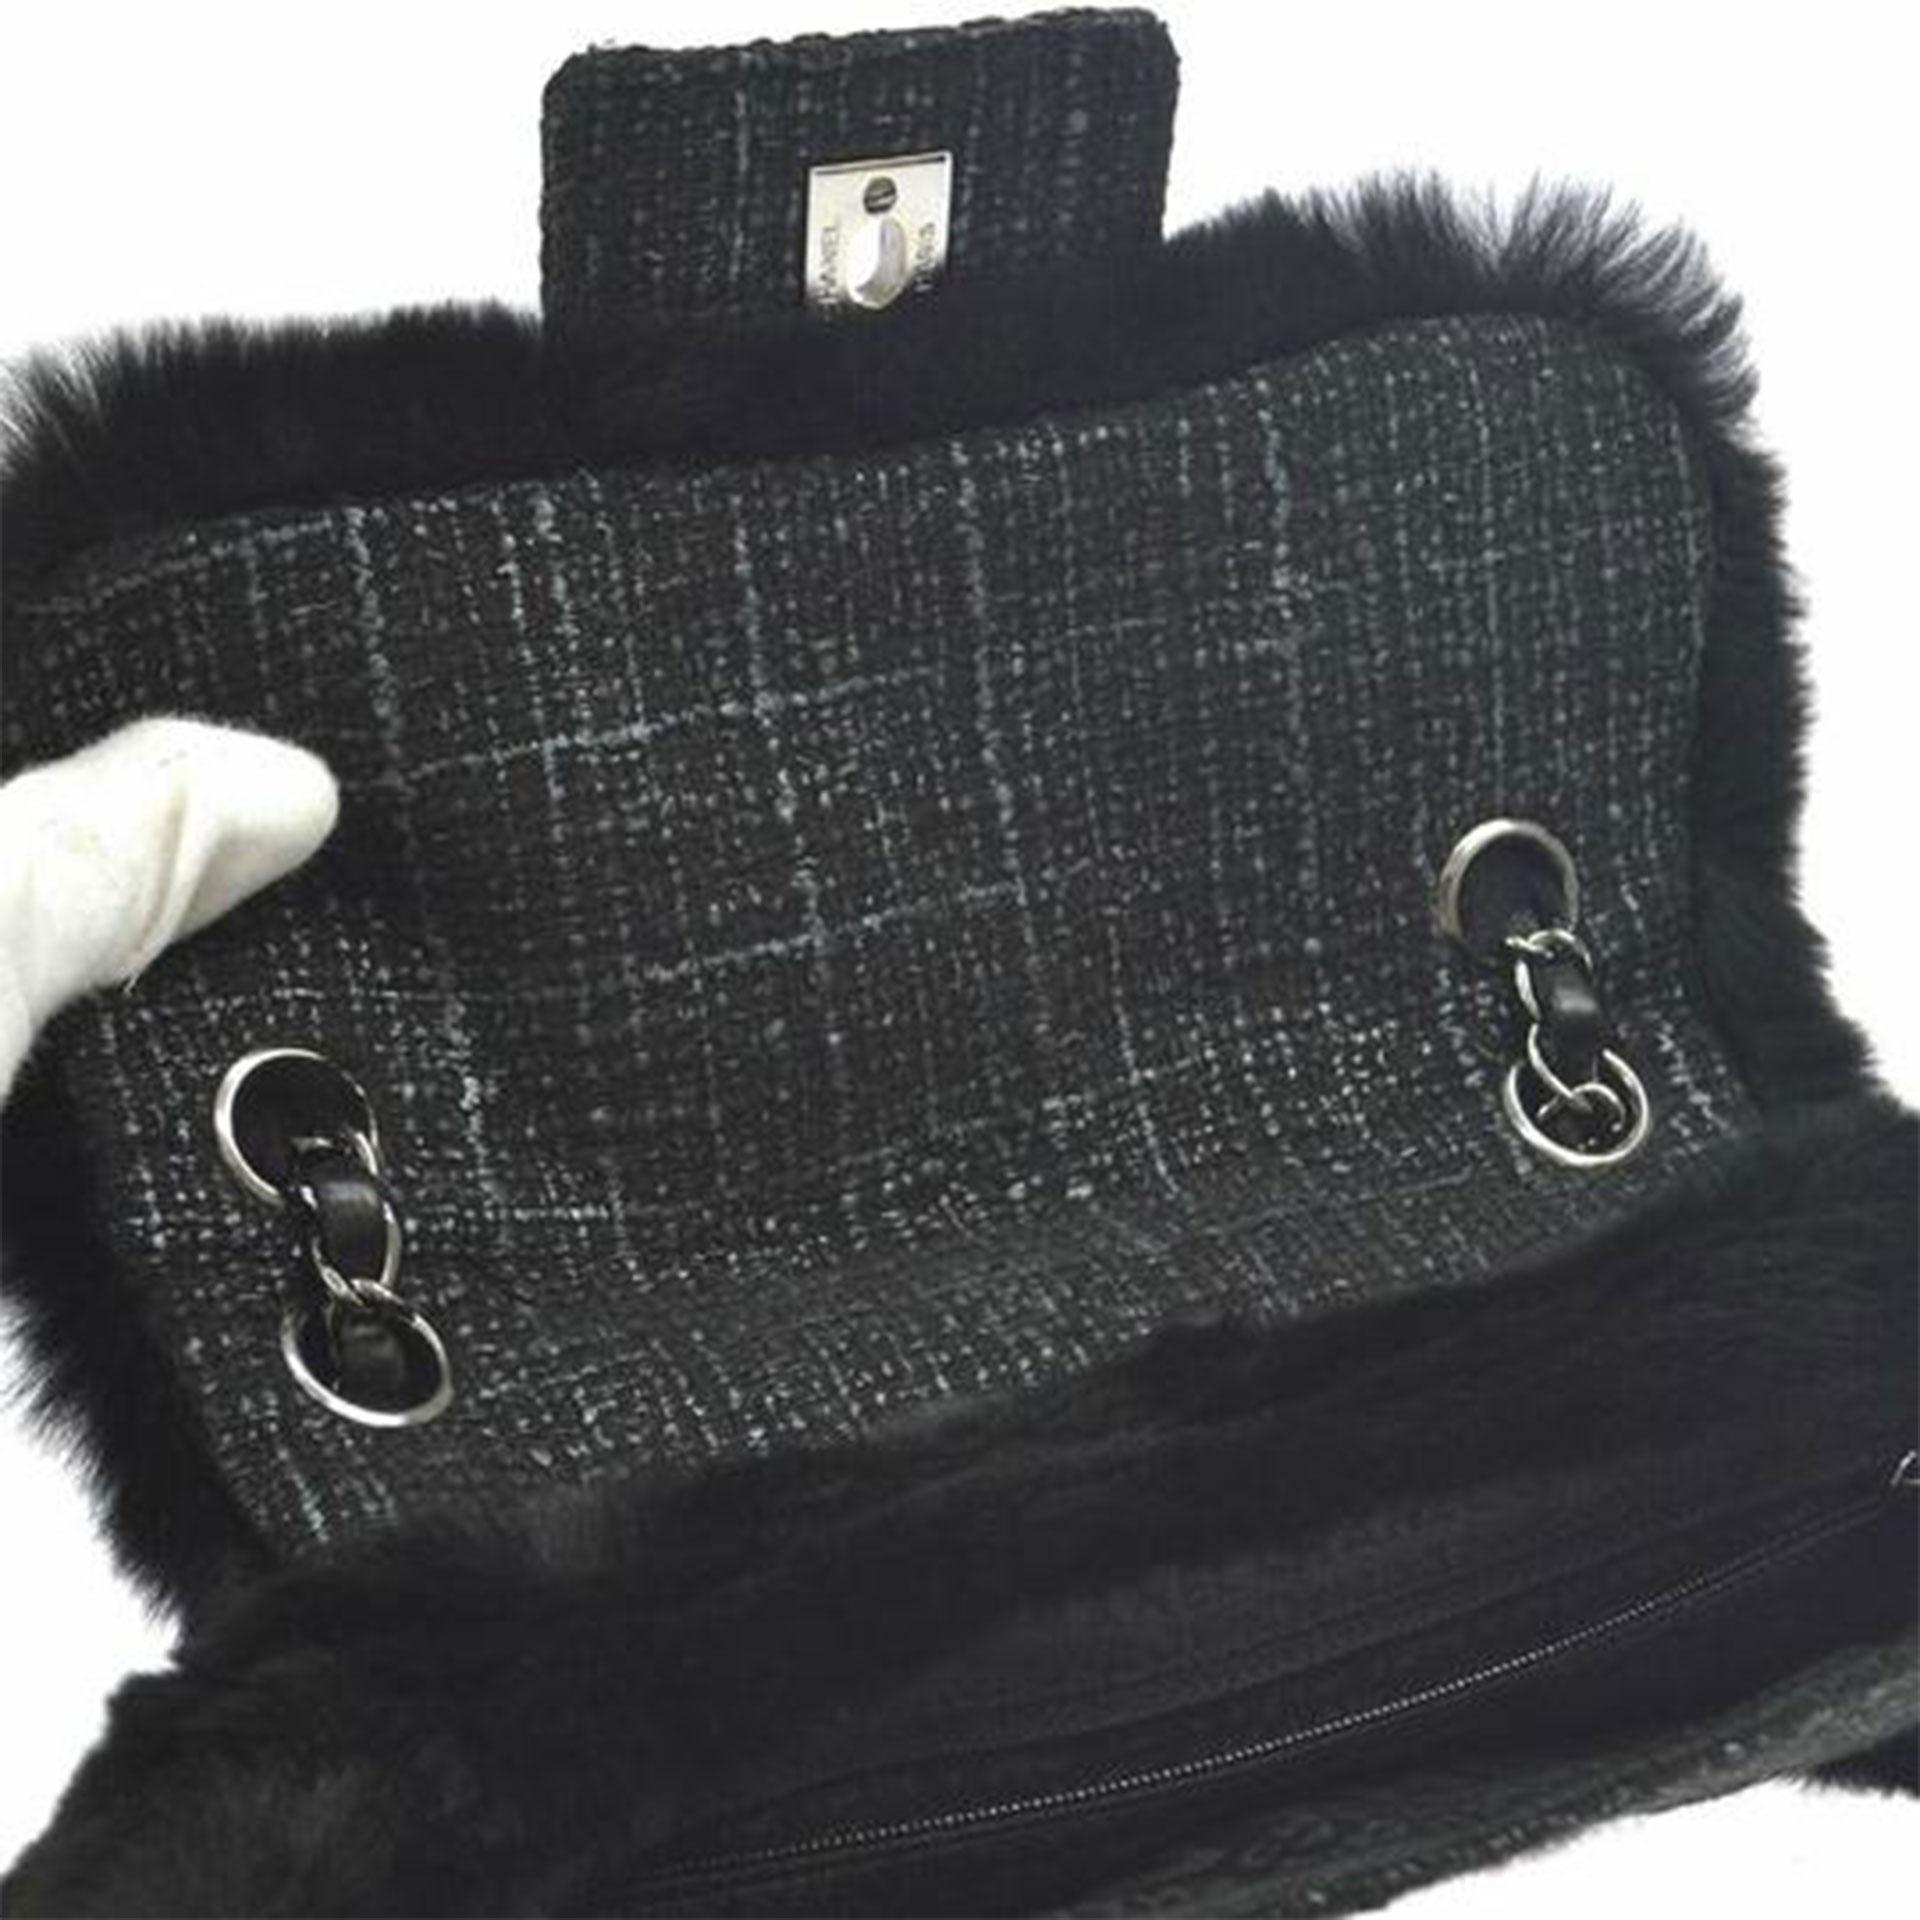 Chanel Classic Flap Rare Vintage Orylag Black and Grey Tweed Fur Cross Body Bag In Good Condition For Sale In Miami, FL